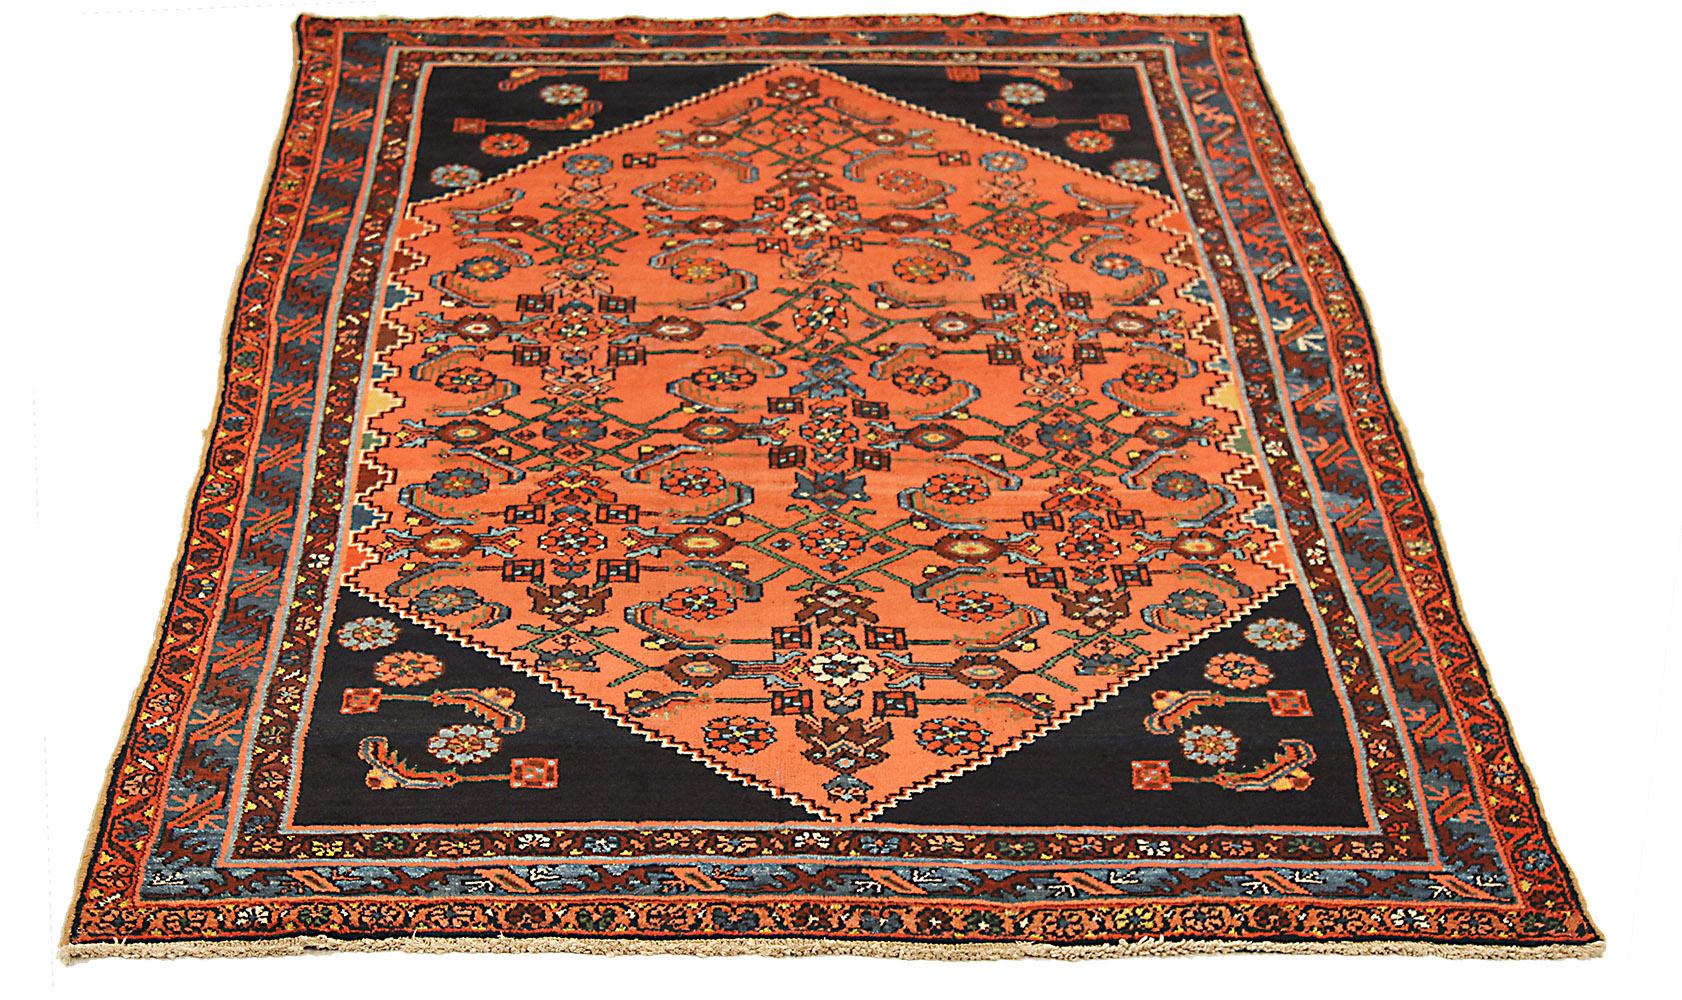 Antique Persian rug handwoven from the finest sheep’s wool and colored with all-natural vegetable dyes that are safe for humans and pets. It’s a traditional Hamadan design featuring floral patterns in brown and blue over an orange and black field.